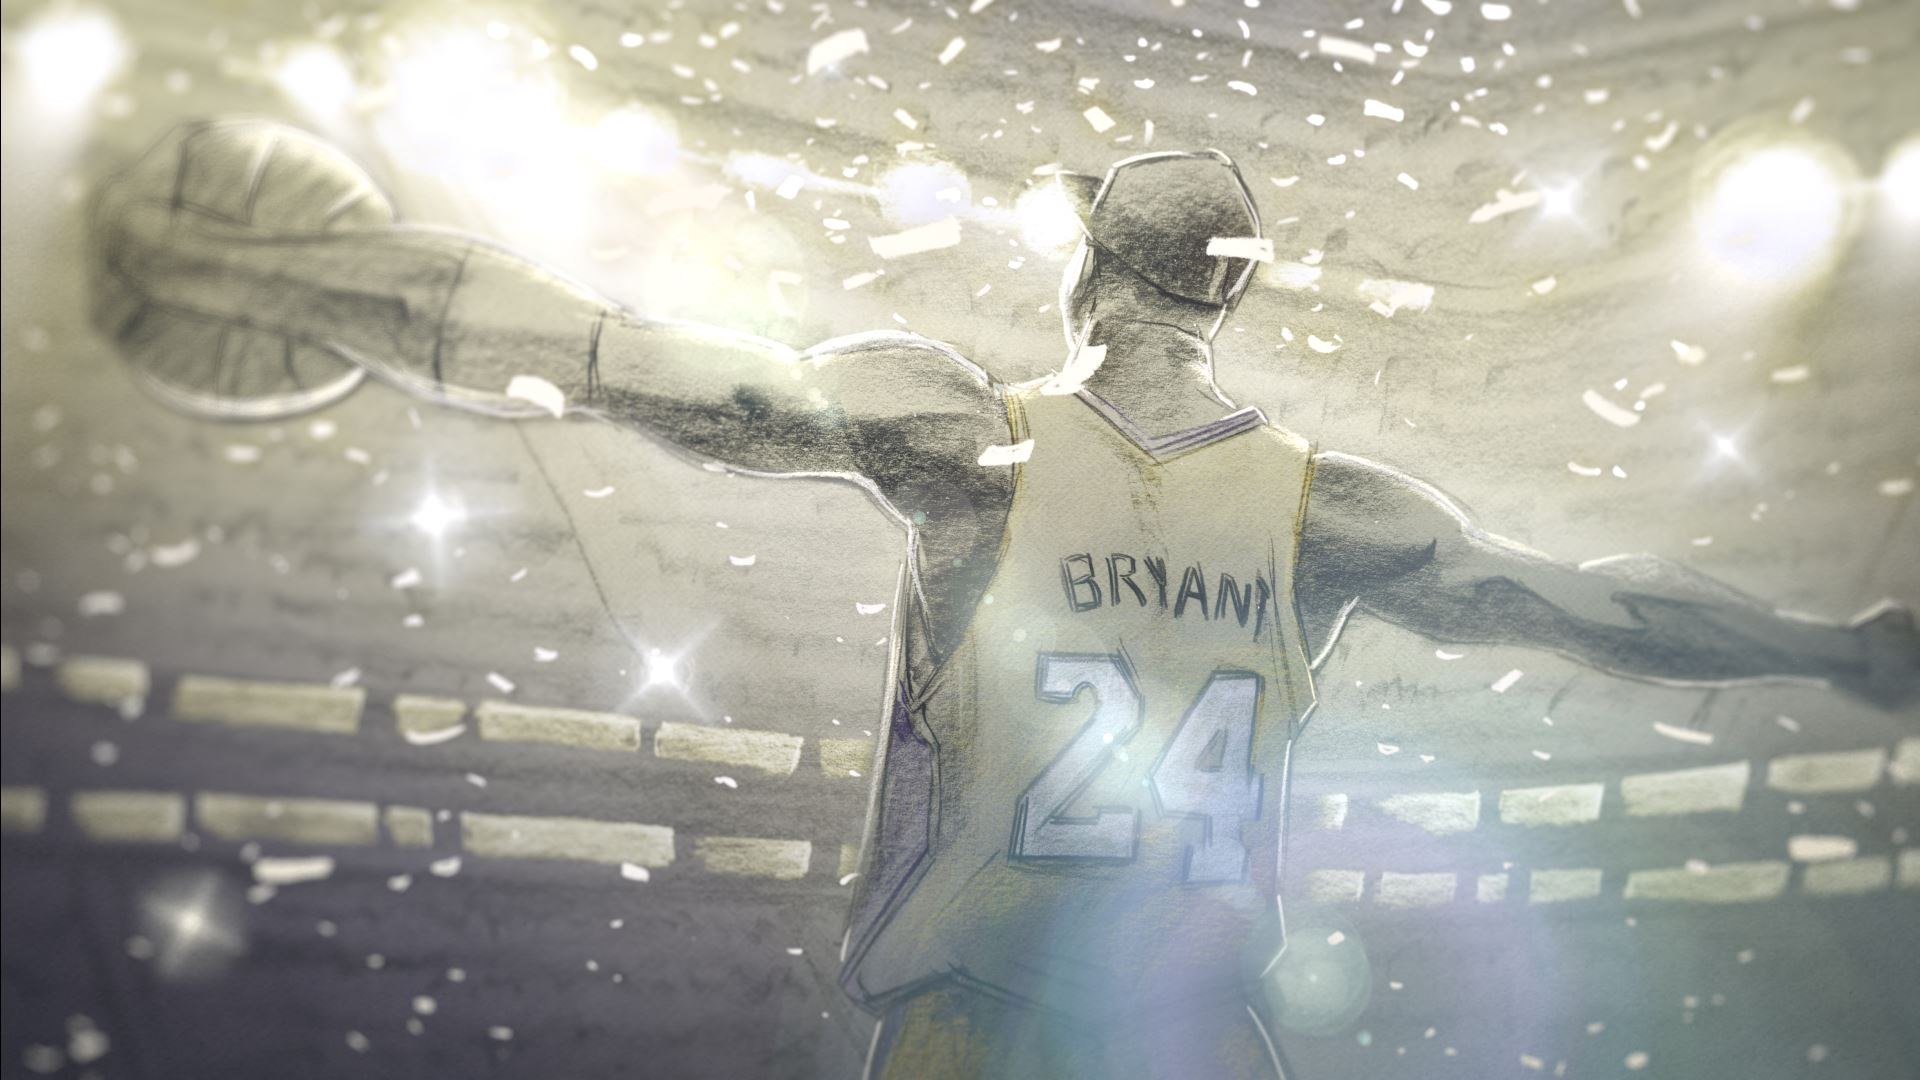 Animation Industry Reacts To Kobe Bryant's Death